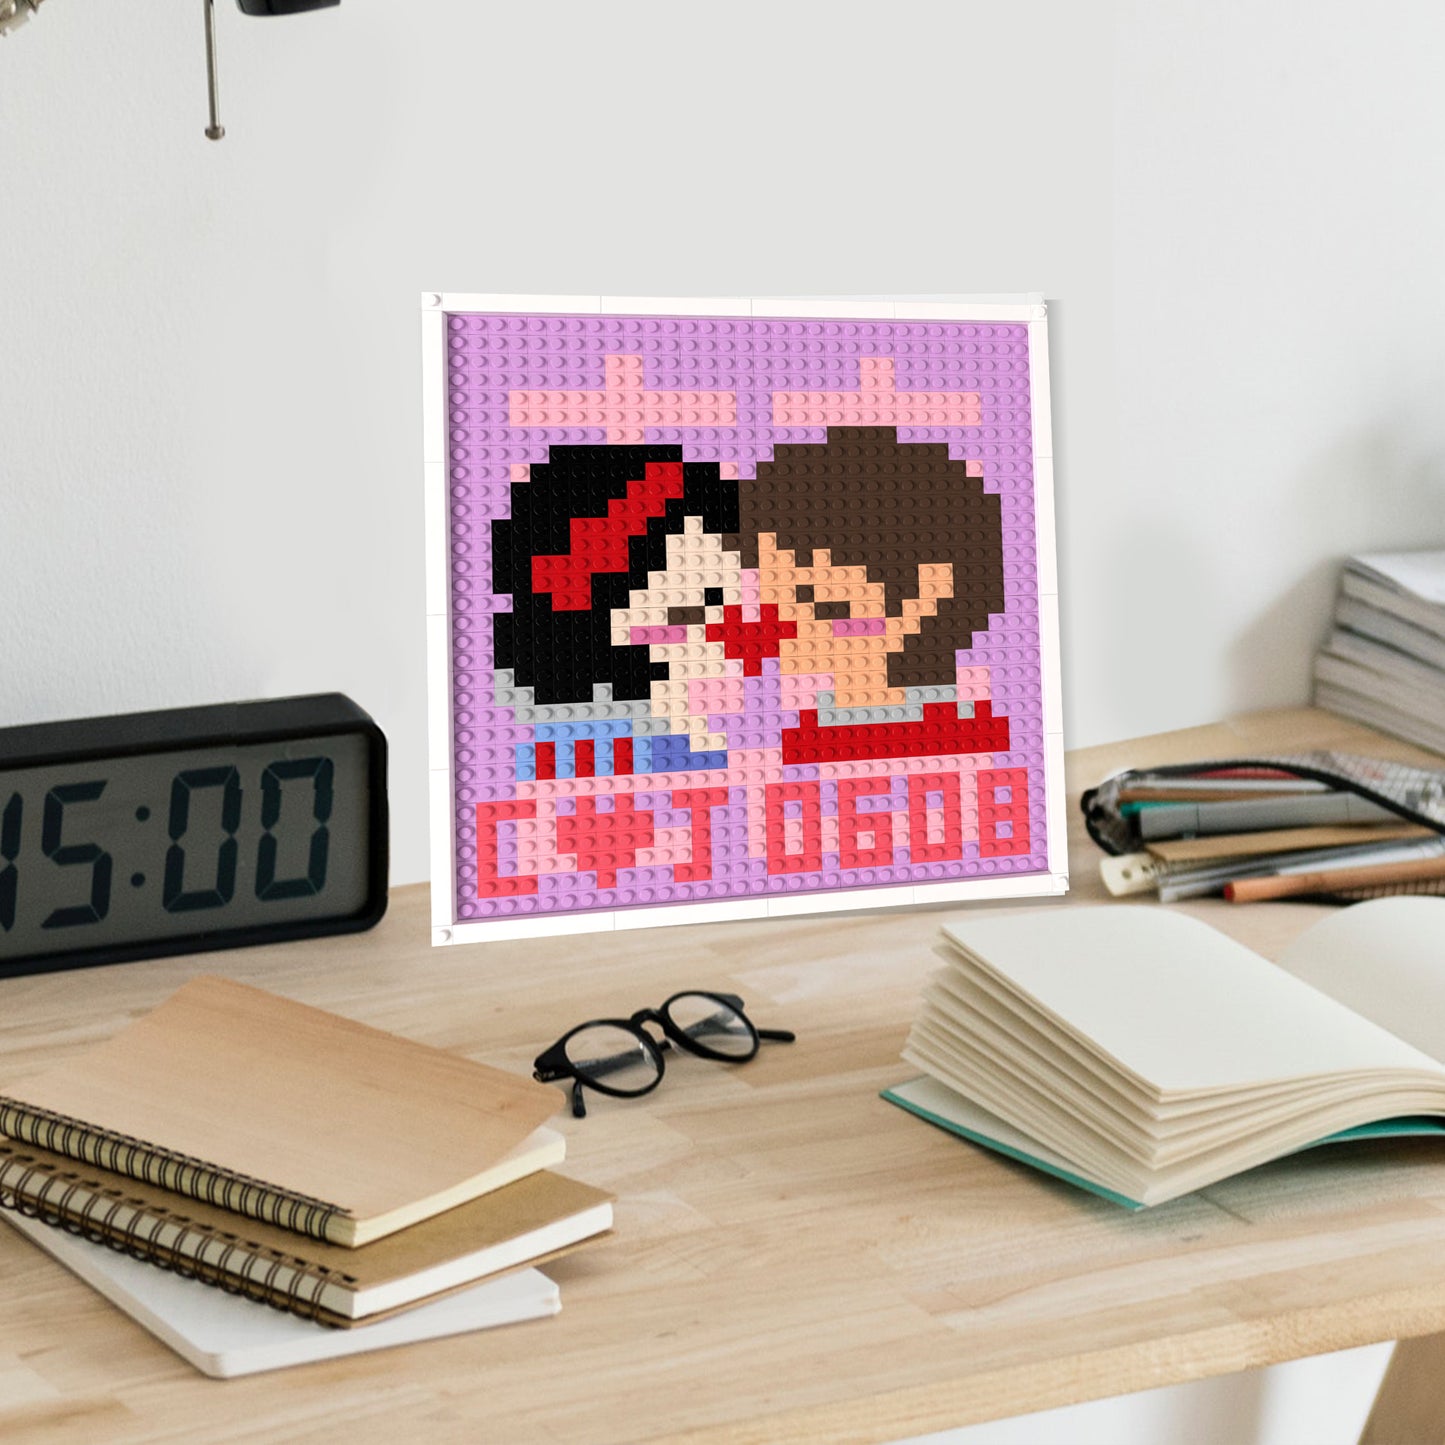 32*32 Compatible Lego Pieces "A Pair of Cartoon Lovers Kissing" Personalized Pixel Art